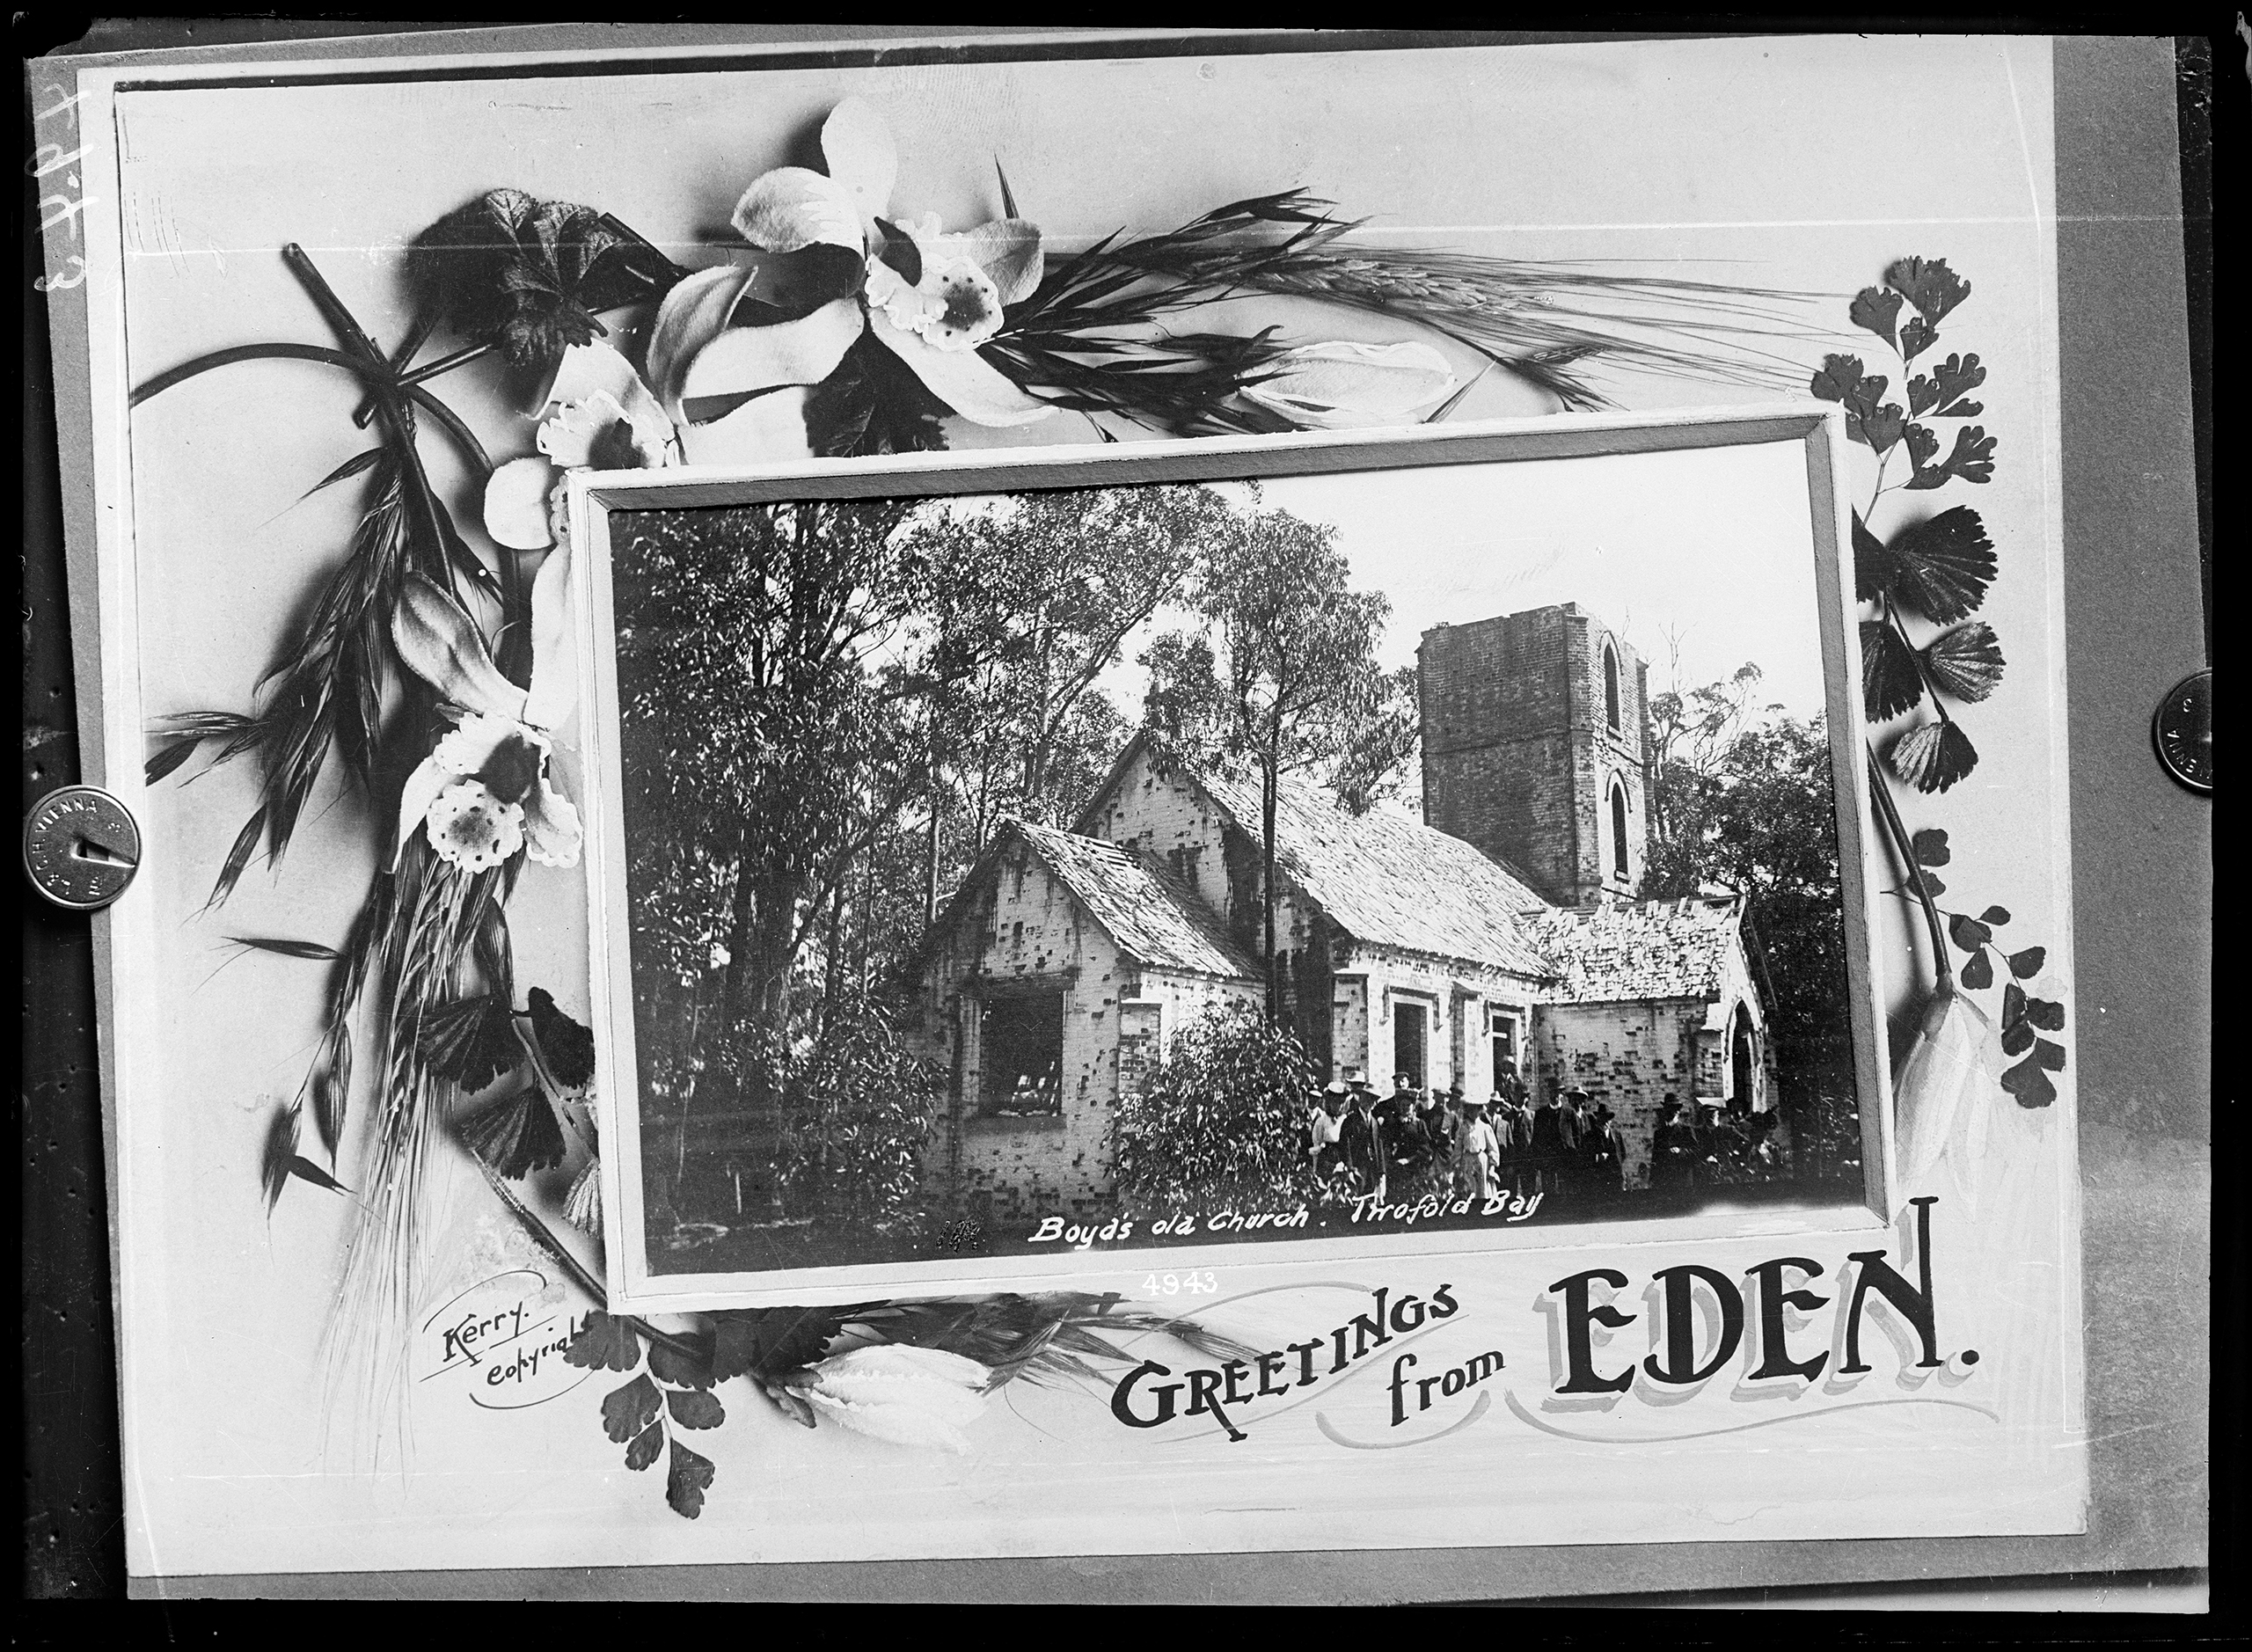 Photograph of artistic greeting card showing Boydtown church, near Eden, NSW